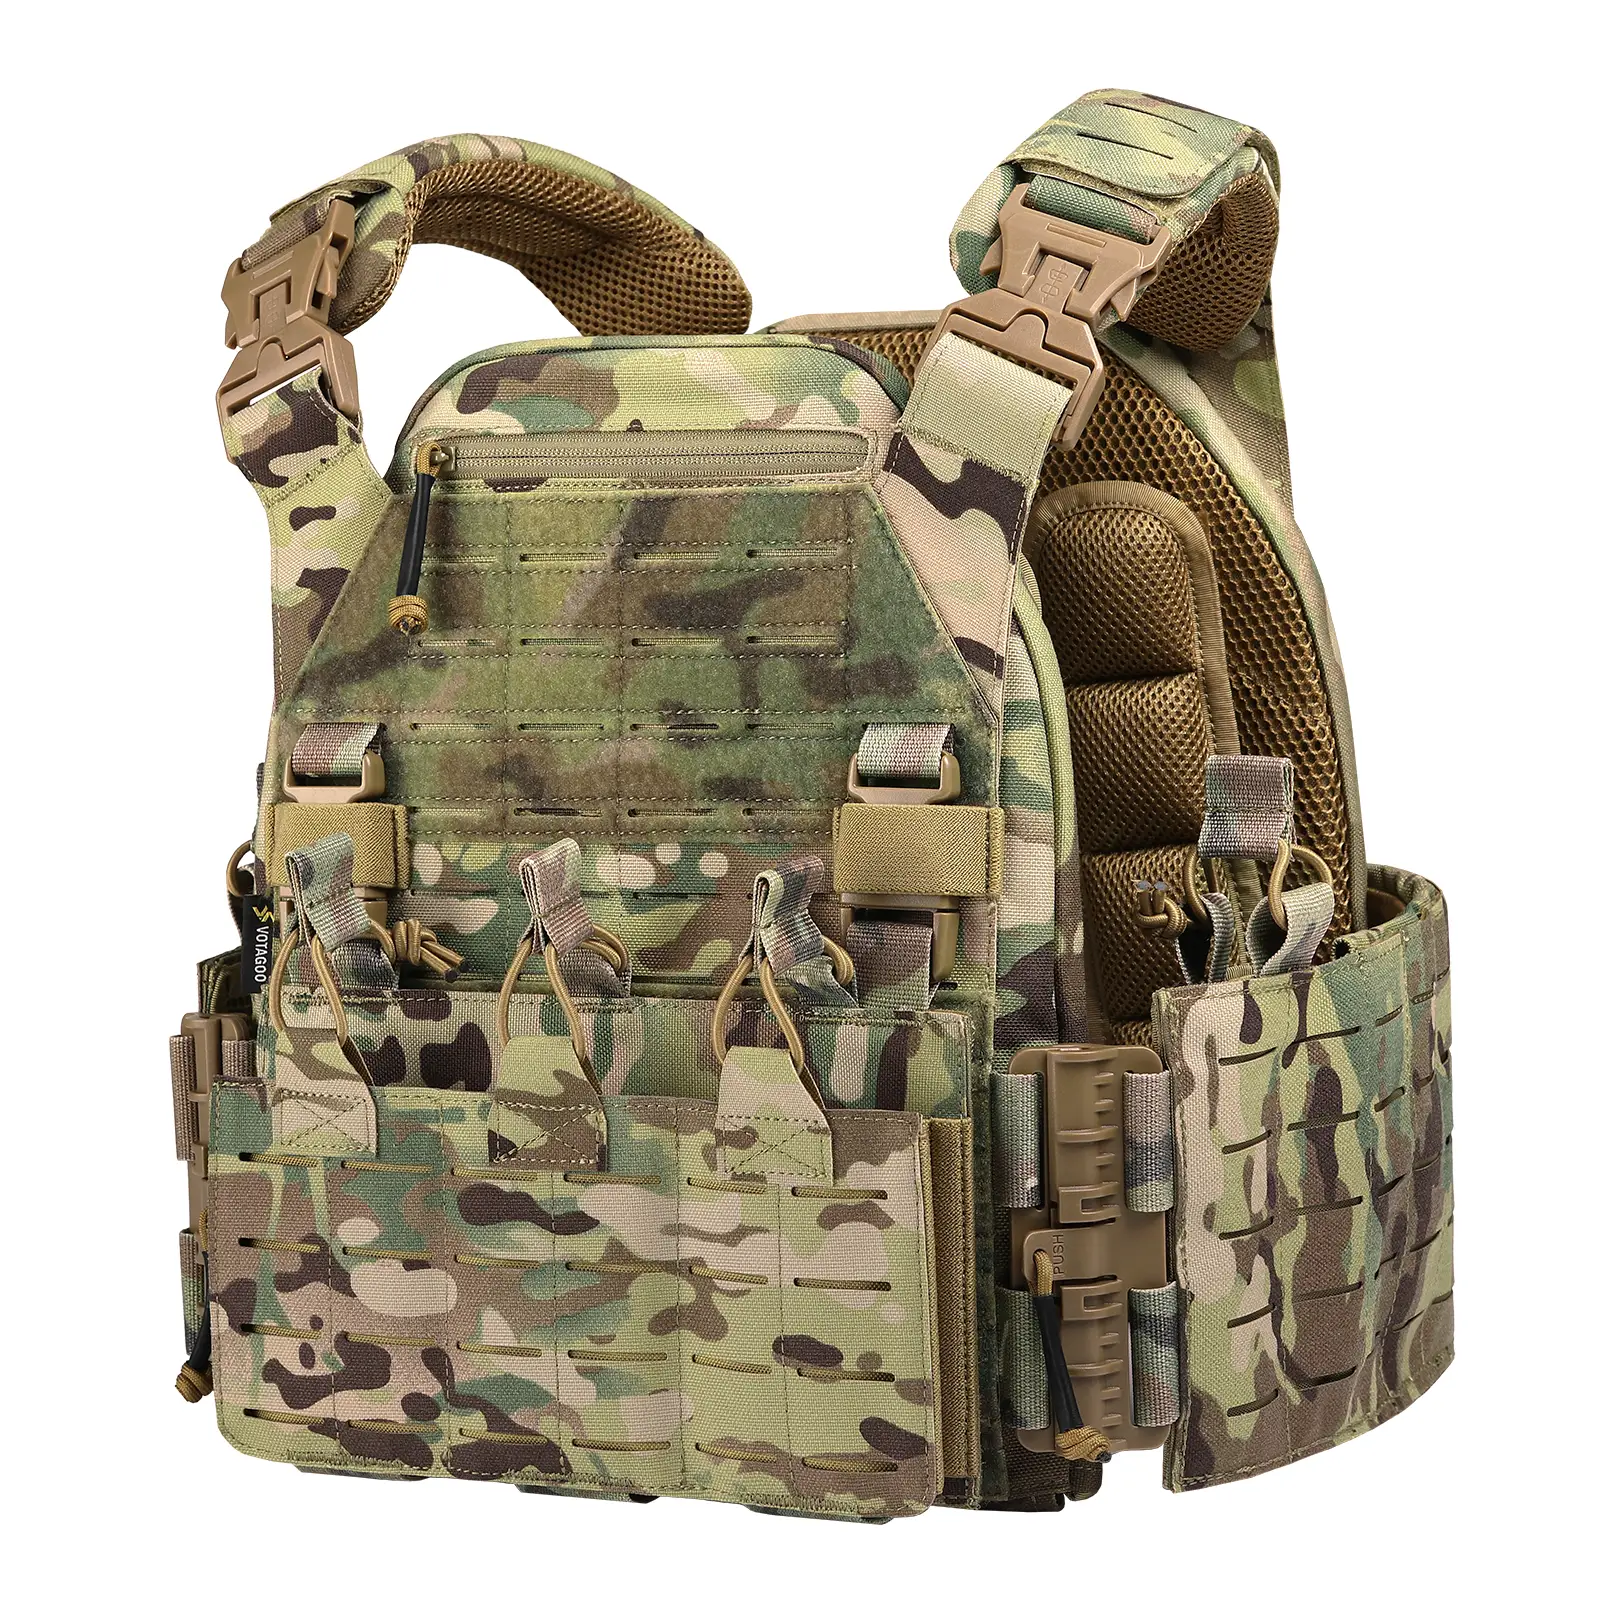 Matrix Special Force Cross Draw Tactical Vest w/ Built In Holster & Mag  Pouches (Color: Tan), Tactical Gear/Apparel, Body Armor & Vests - Evike.com  Airsoft Superstore